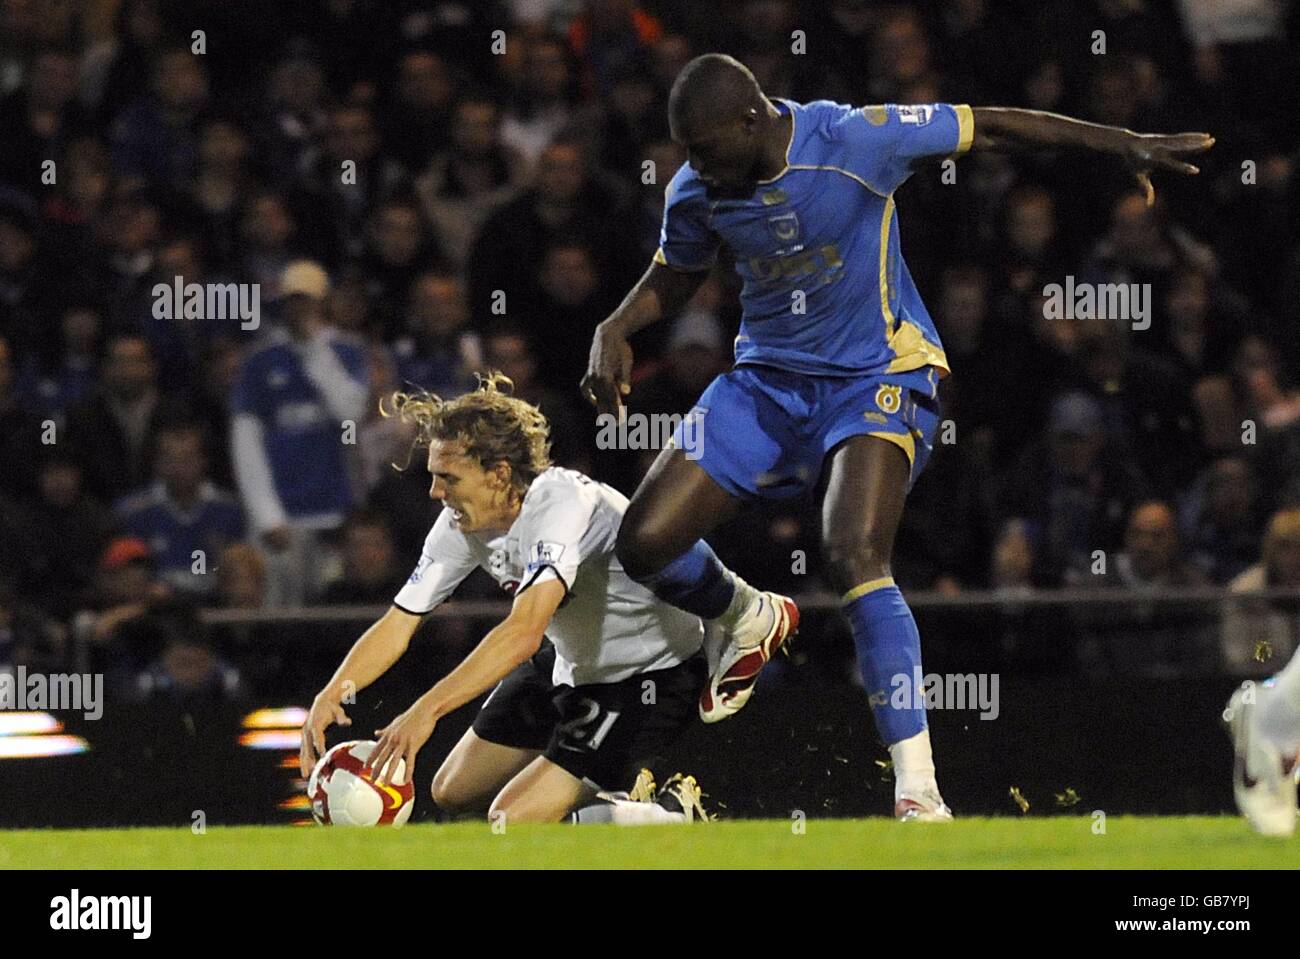 Fulham's Jimmy Bullard (left) goes to ground after a challenge by Portsmouth's Papa Bouba Diop. Stock Photo